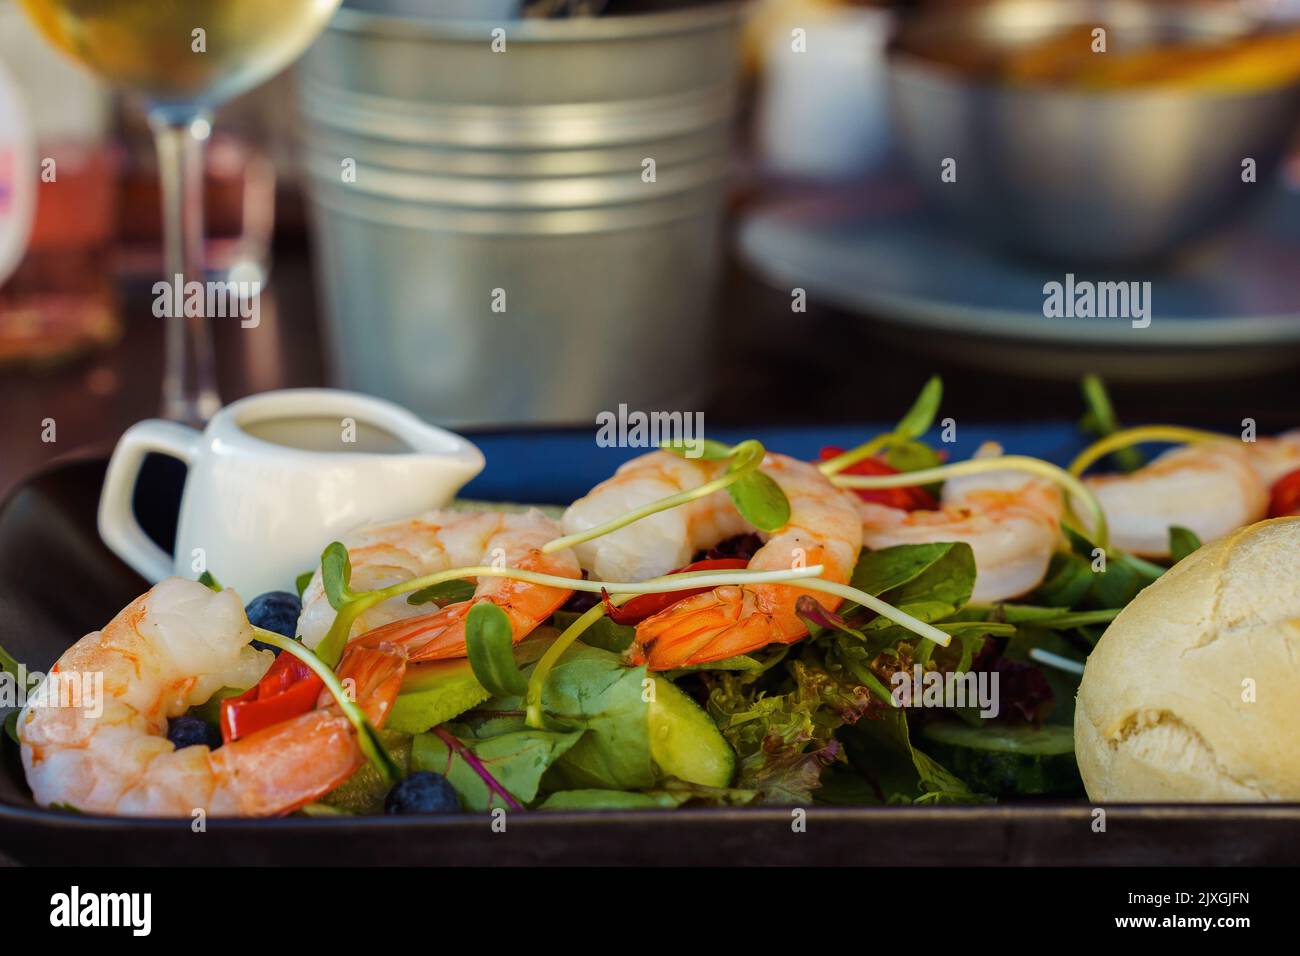 Shrimp salad on a table in a restaurant close-up. Healthy food. Stock Photo